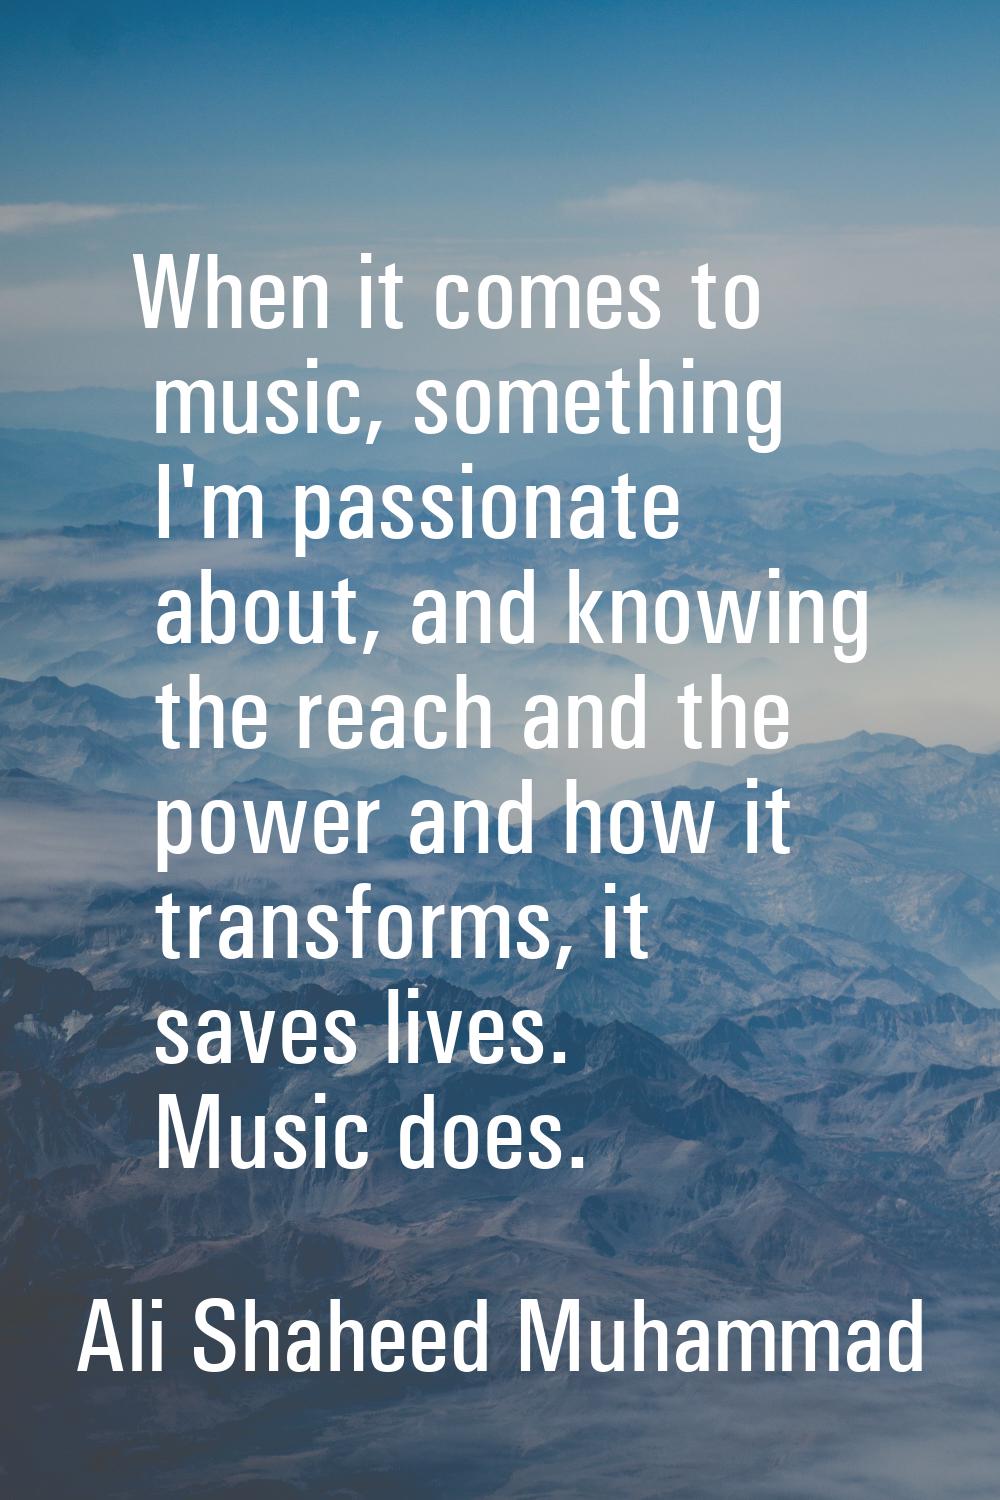 When it comes to music, something I'm passionate about, and knowing the reach and the power and how